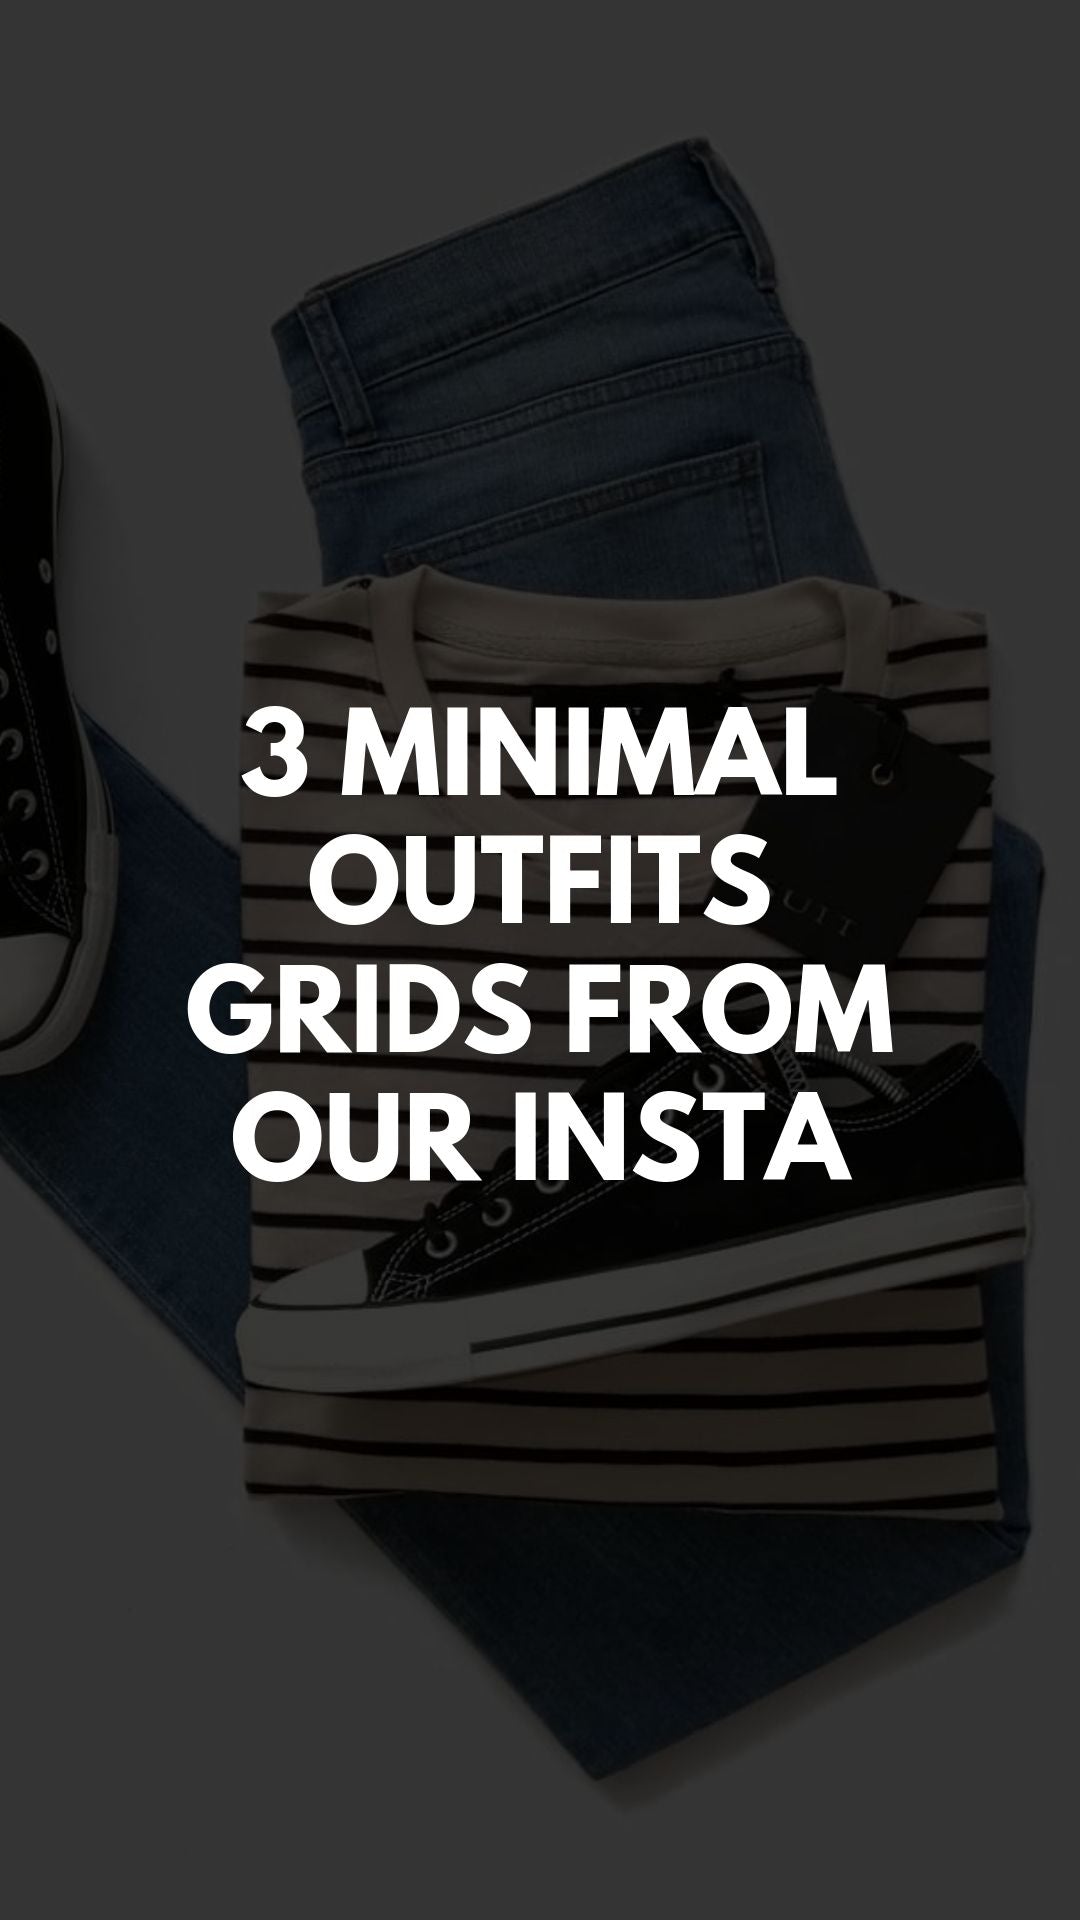 3 MINIMAL  OUTFITS GRIDS FROM OUR INSTA